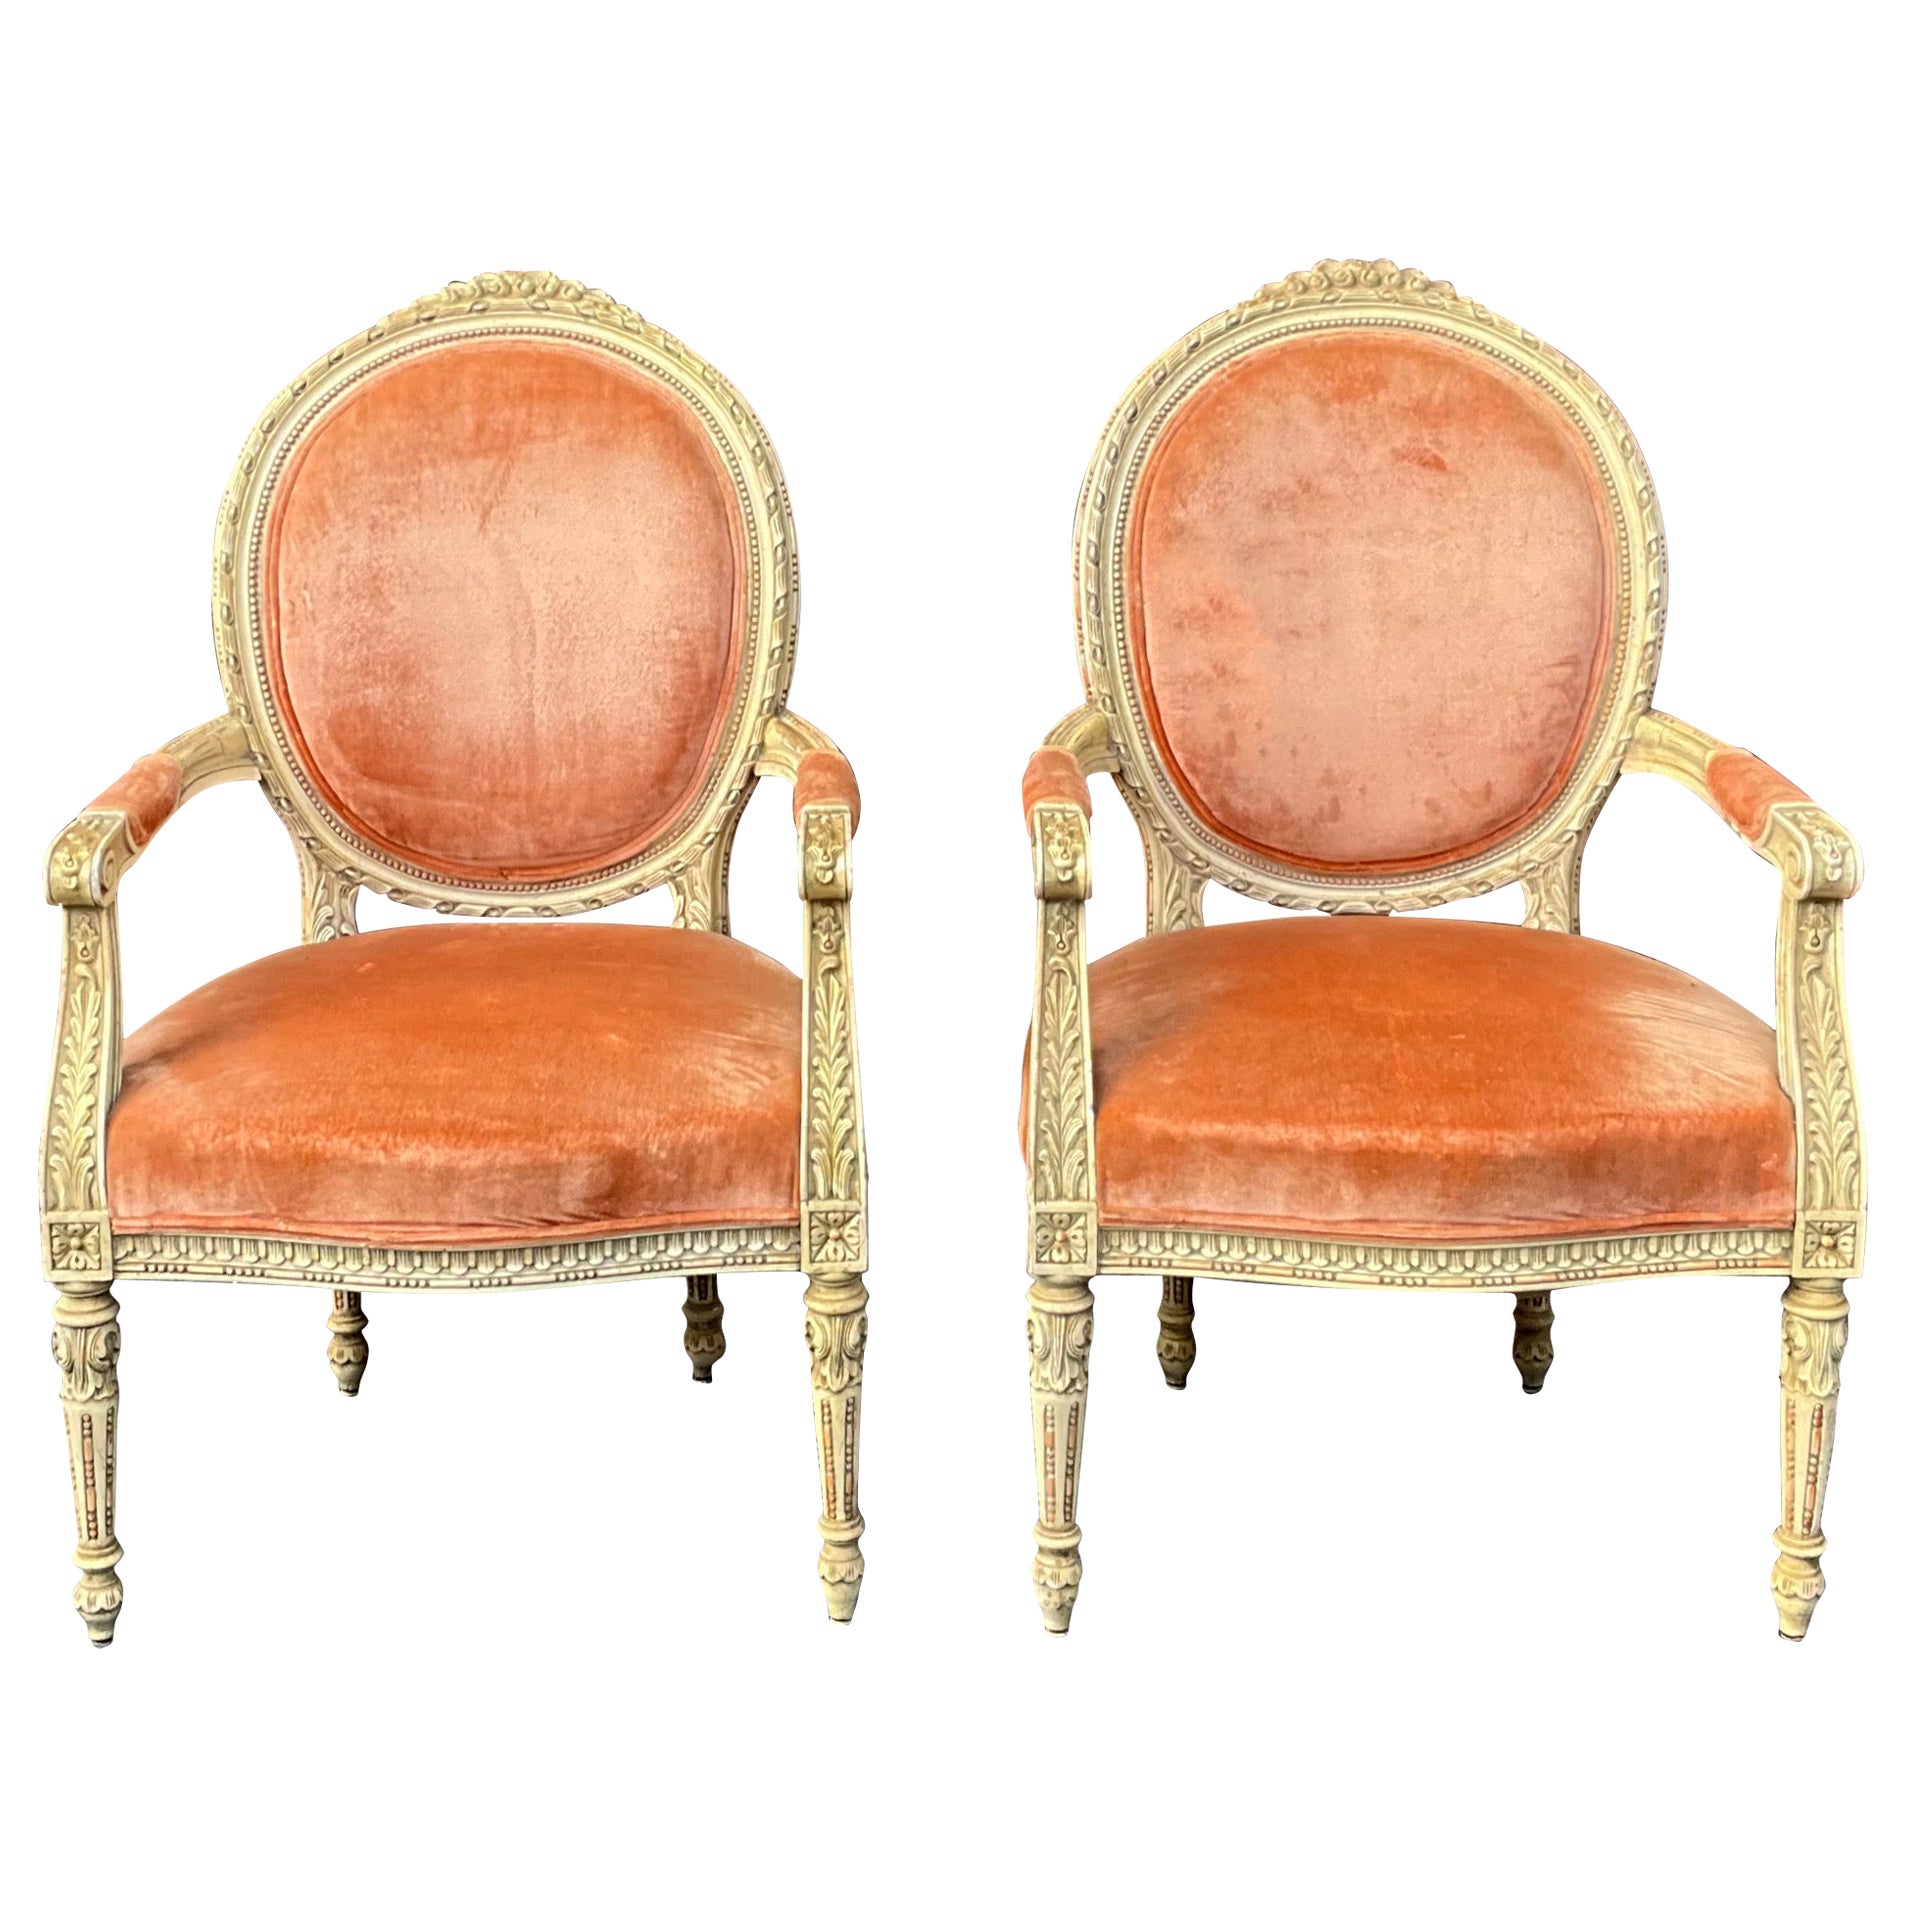 French Louis XVI Style Carved & Painted Bergere Chairs In Velvet - Pair For Sale